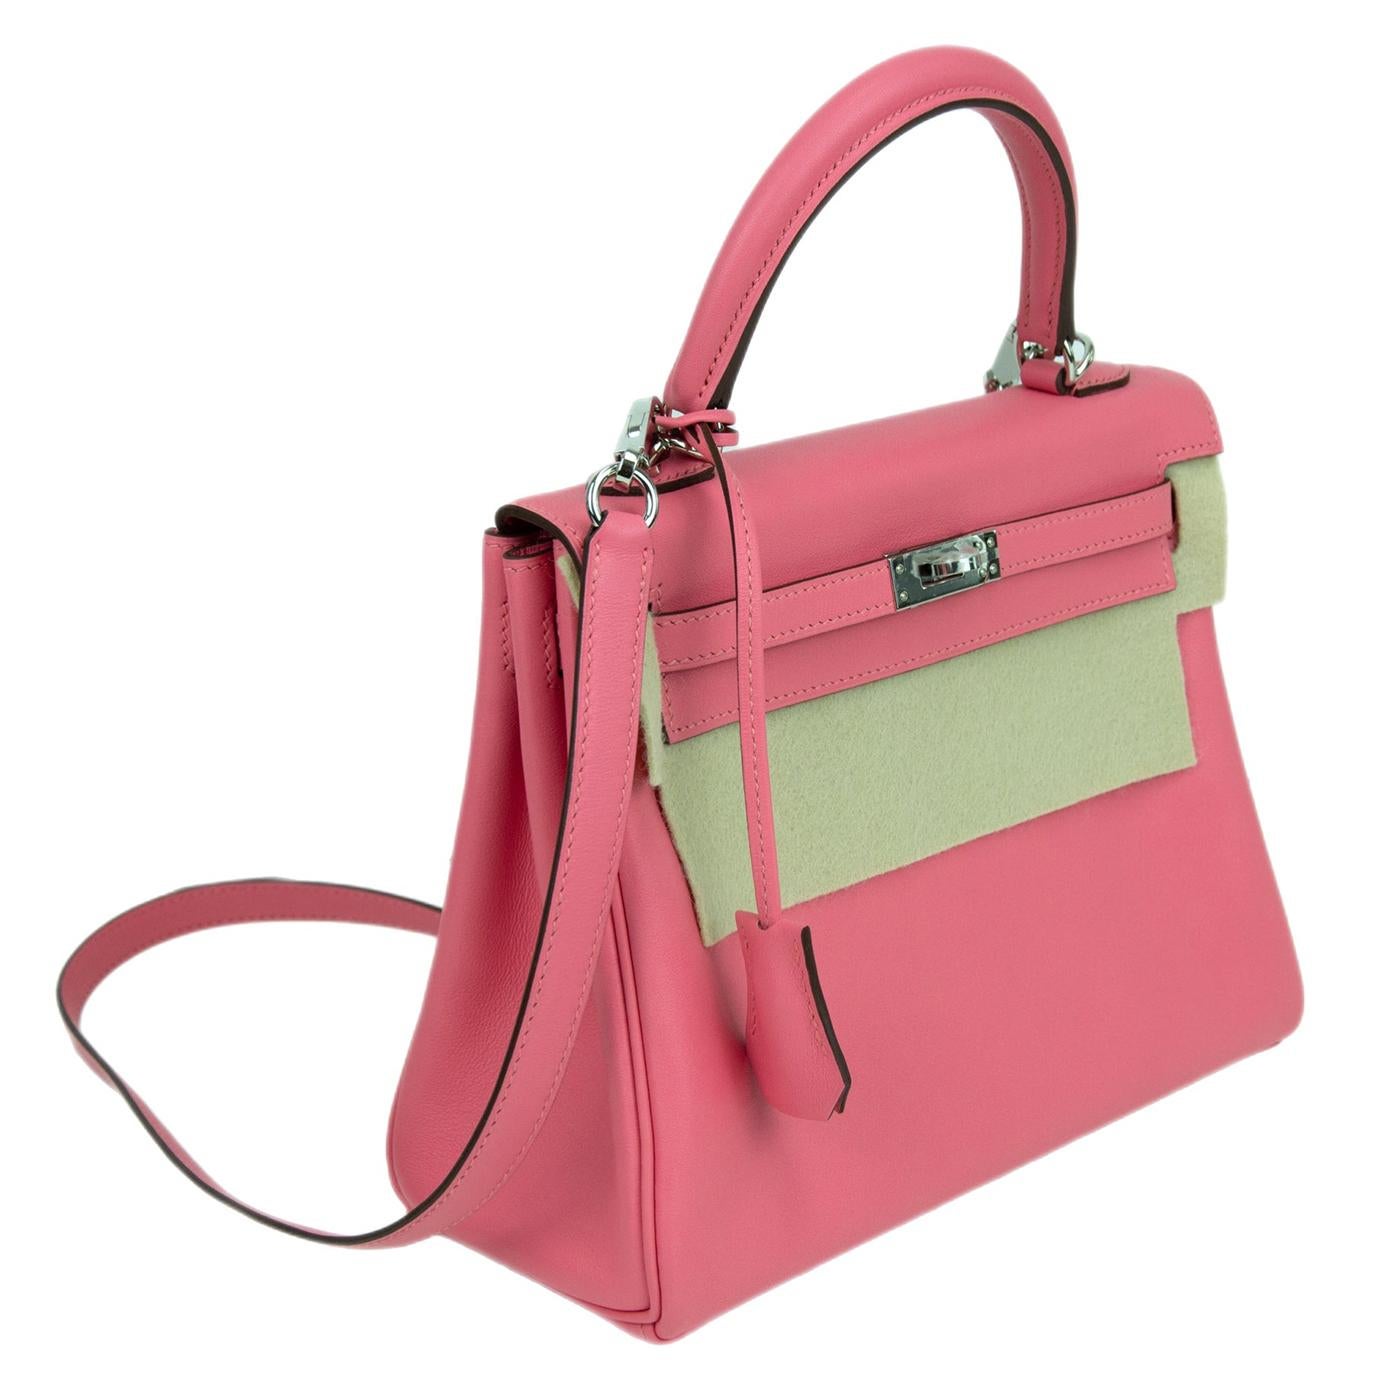 This Kelly, in the Retourne style, is in Pink Azalee swift leather with palladium hardware and has tonal stitching, two straps with front toggle closure, clochette with lock and two keys, single rolled handle and removable shoulder